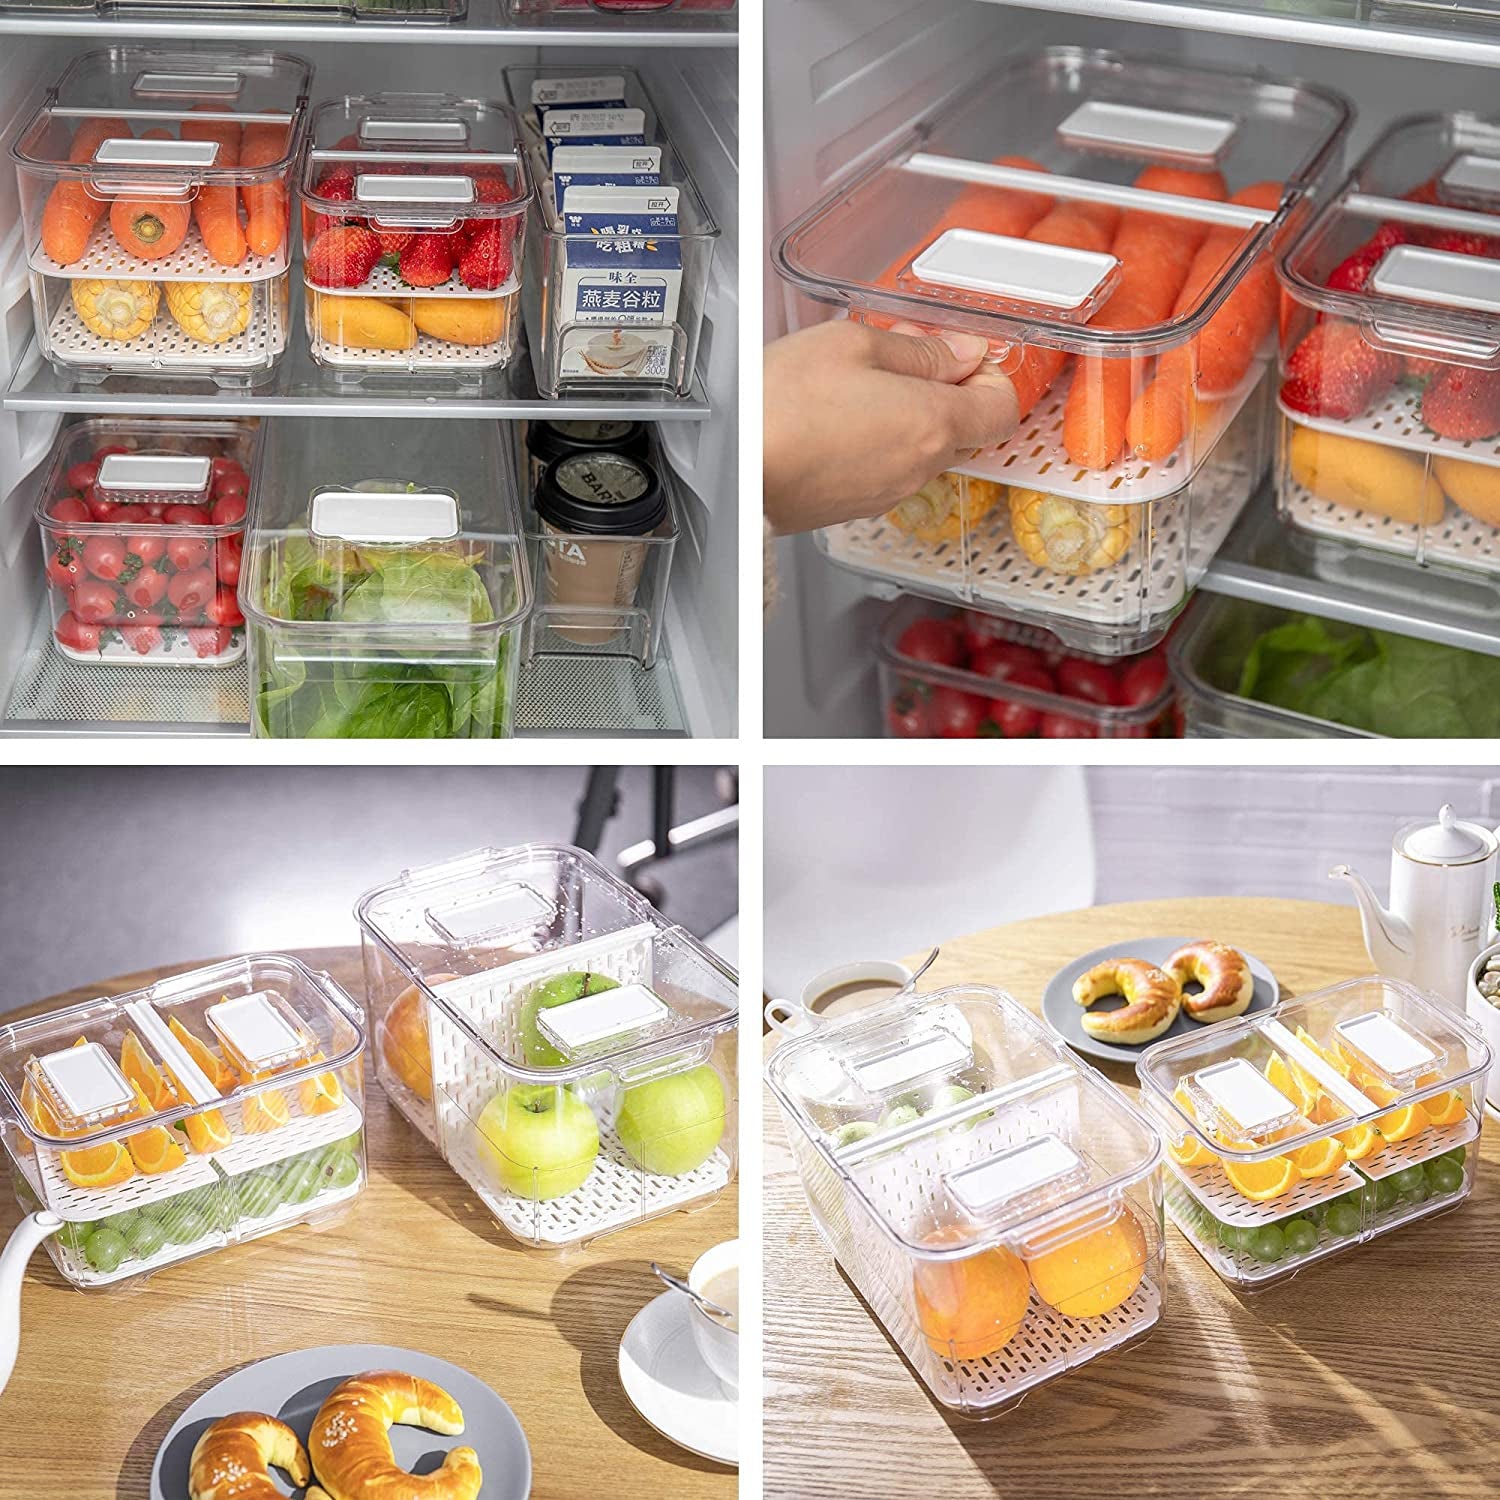 Produce Saver with Folding Lids,2 Piece Fruit Vegetable Storage Container with Vents Stackable Fridge Drawers Organizer Salad Lettuce Keeper for Refrigerator,Bpa-Free Fresh Keeper,5.7L&2.8L